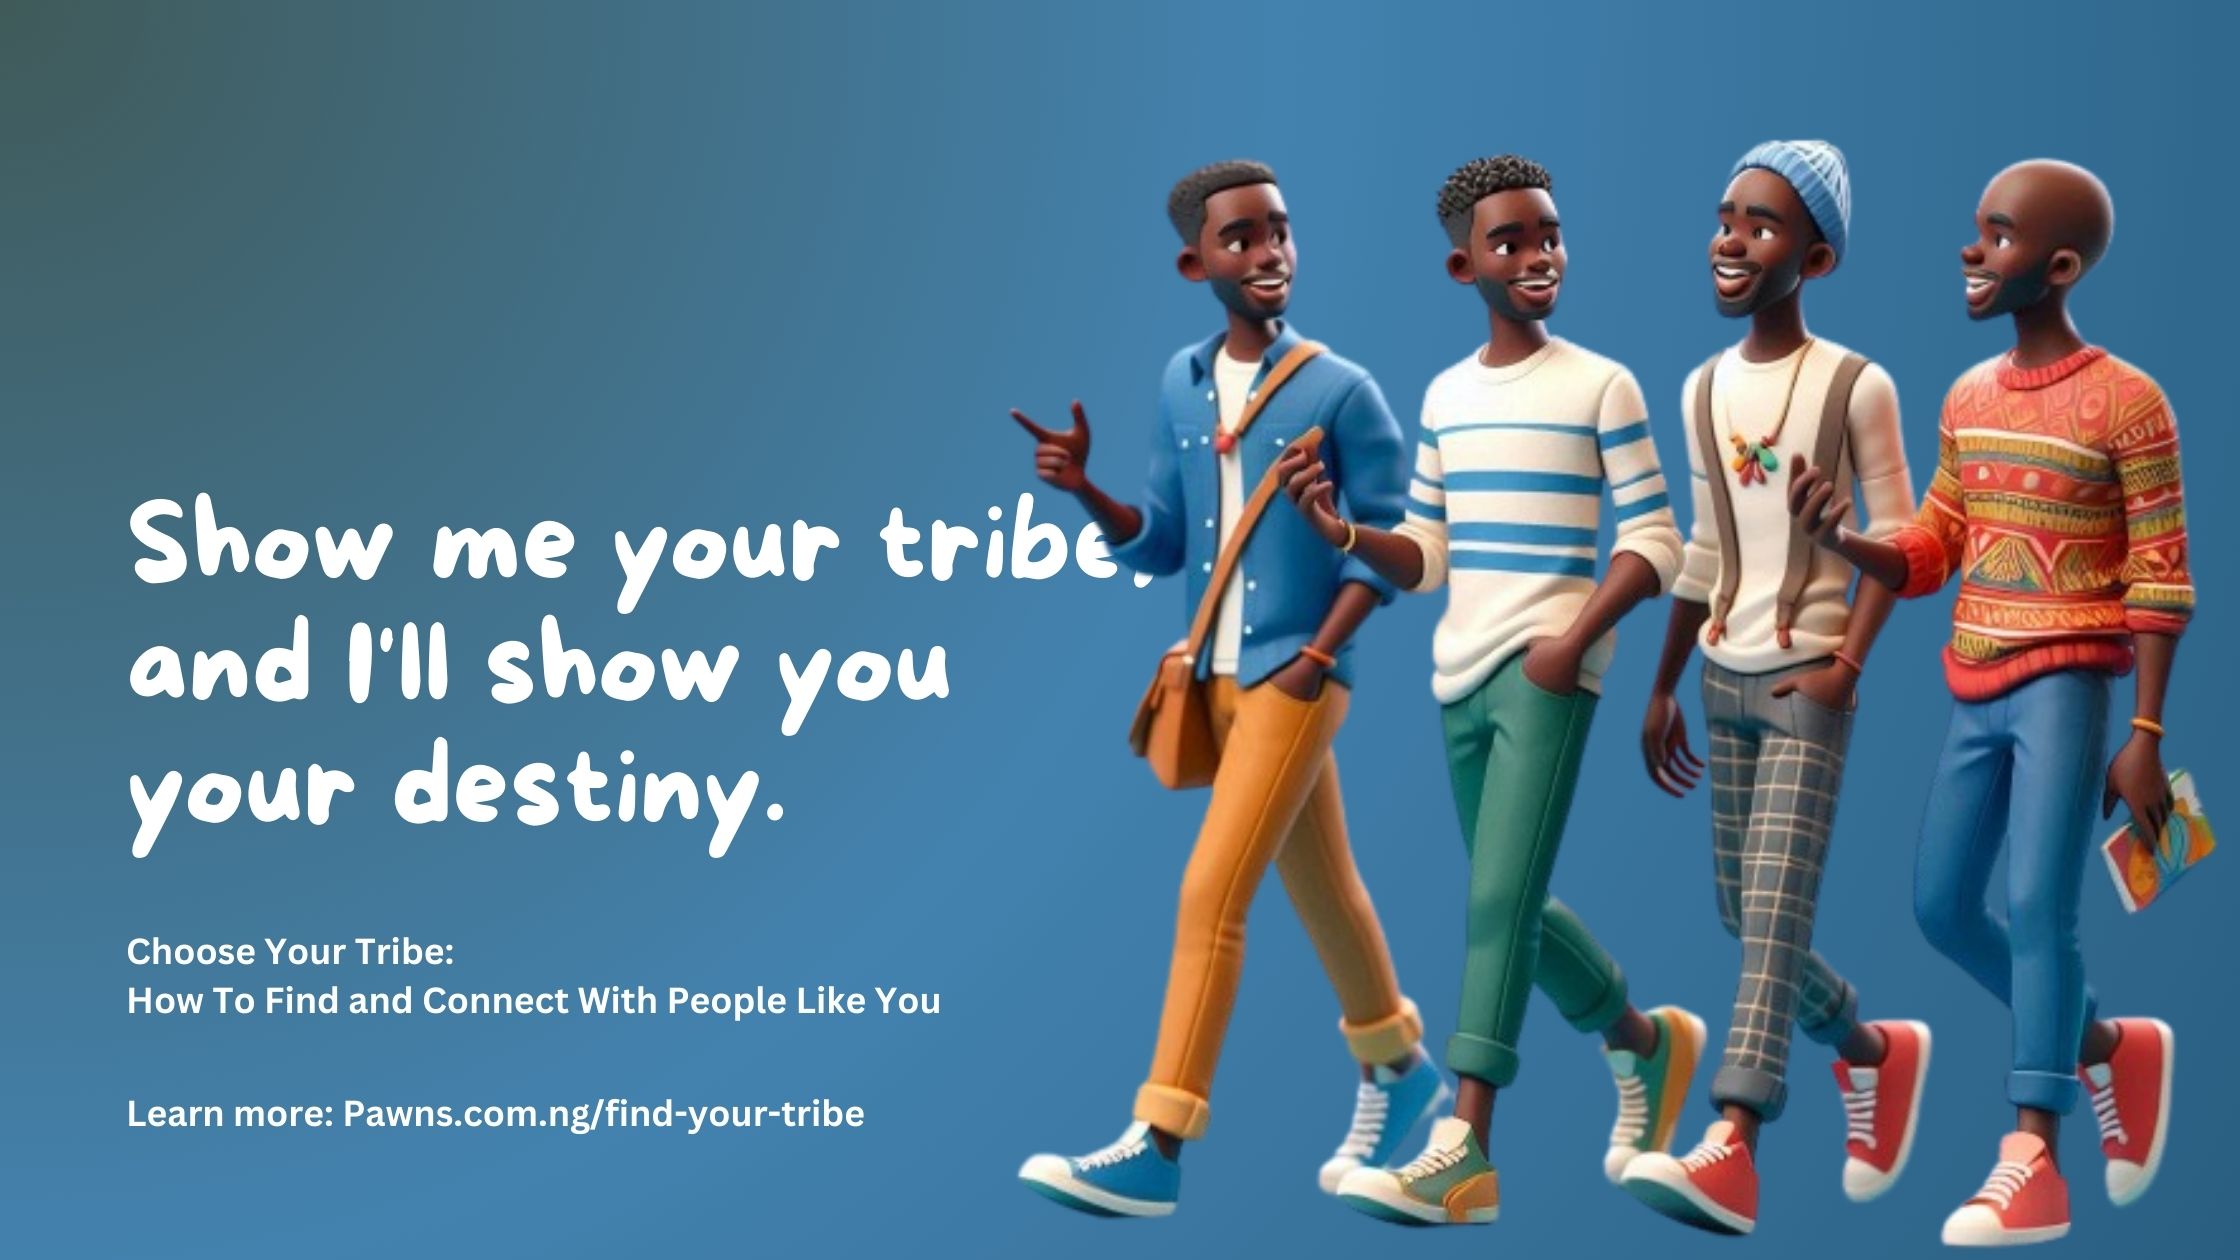 Show me your tribe, and I'll show you your destiny. Choose Your Tribe How To Find and Connect With People Like You